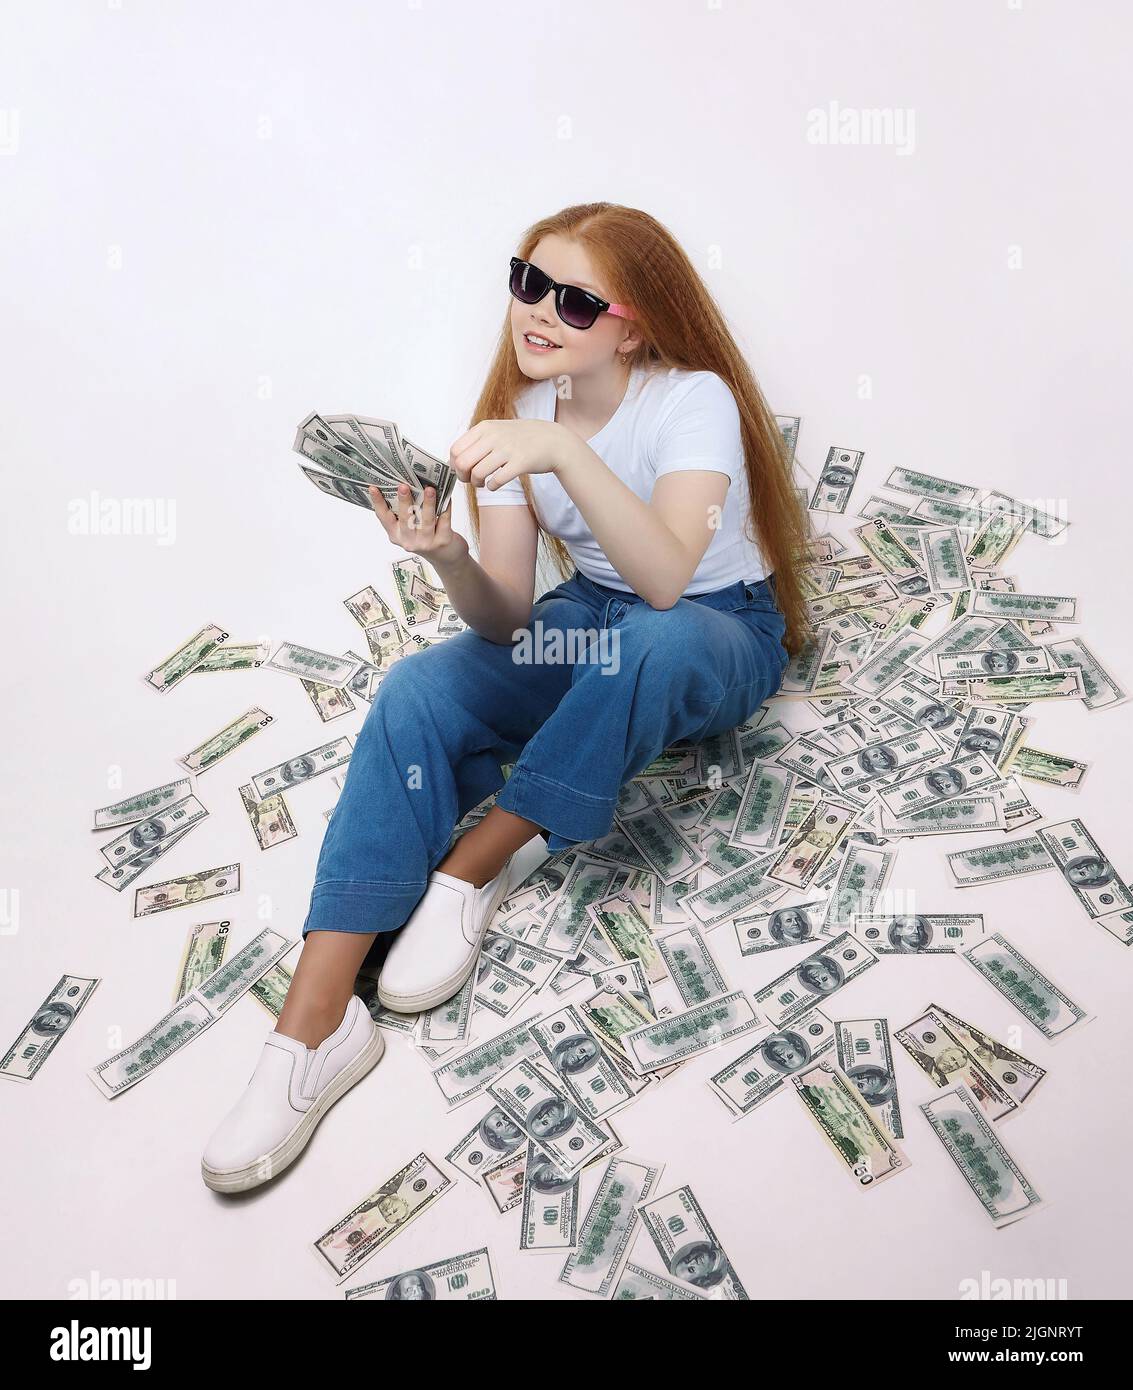 beautiful red-haired girl is sitting on money. Dollar bills are scattered on the floor. Stock Photo